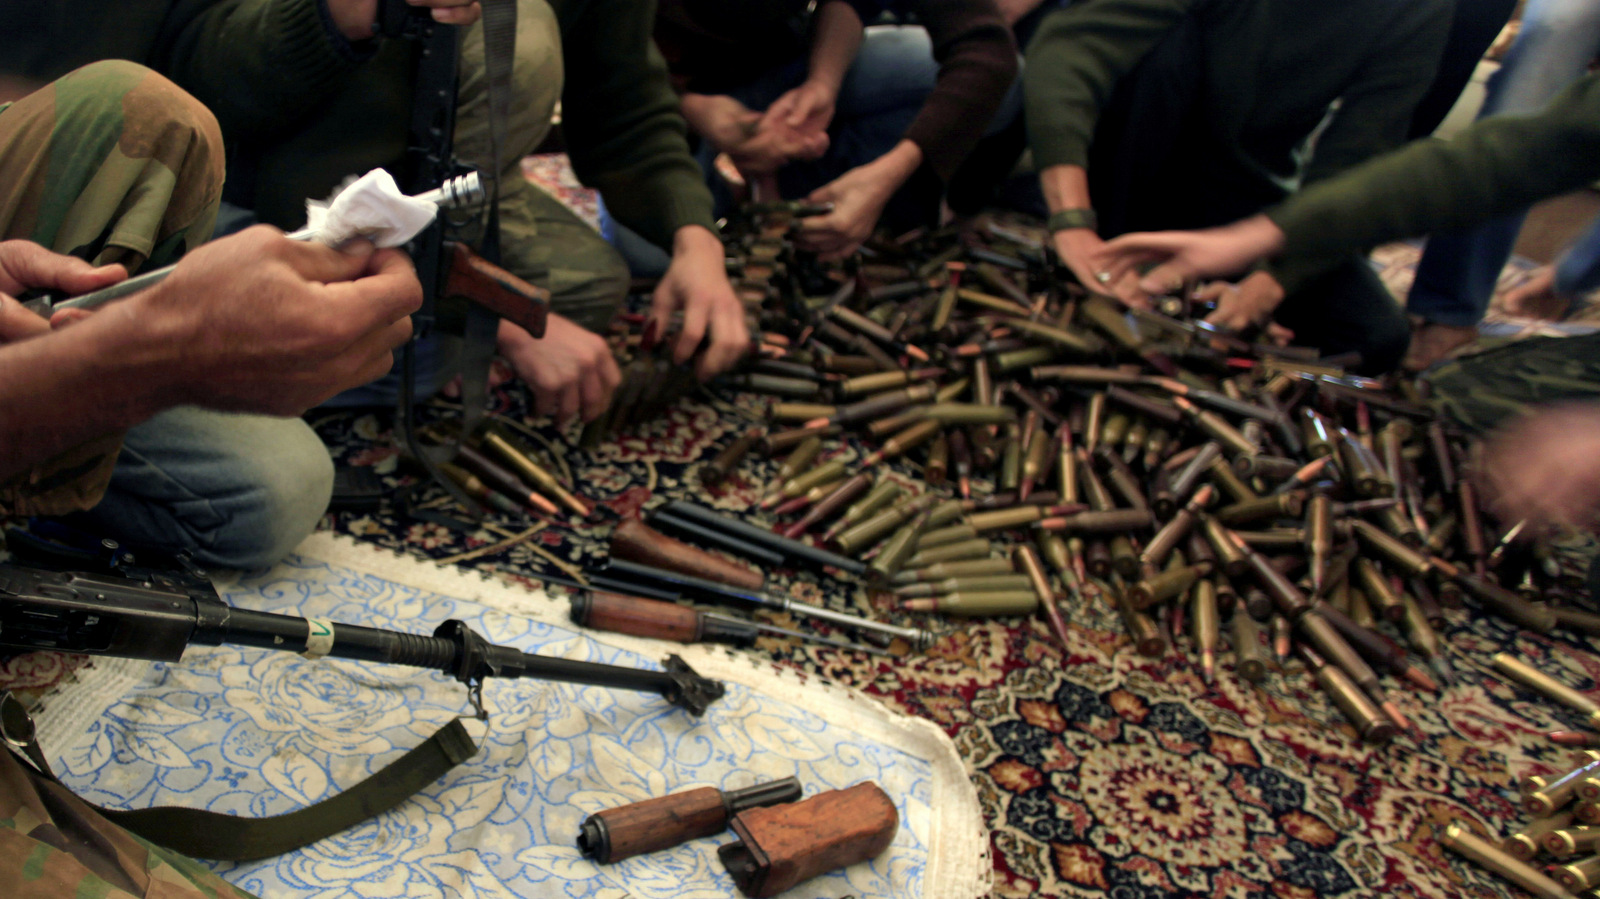 Free Syrian Army fighters clean their weapons and check ammunition at their base on the outskirts of Aleppo, Syria. (Khalil Hamra/AP)